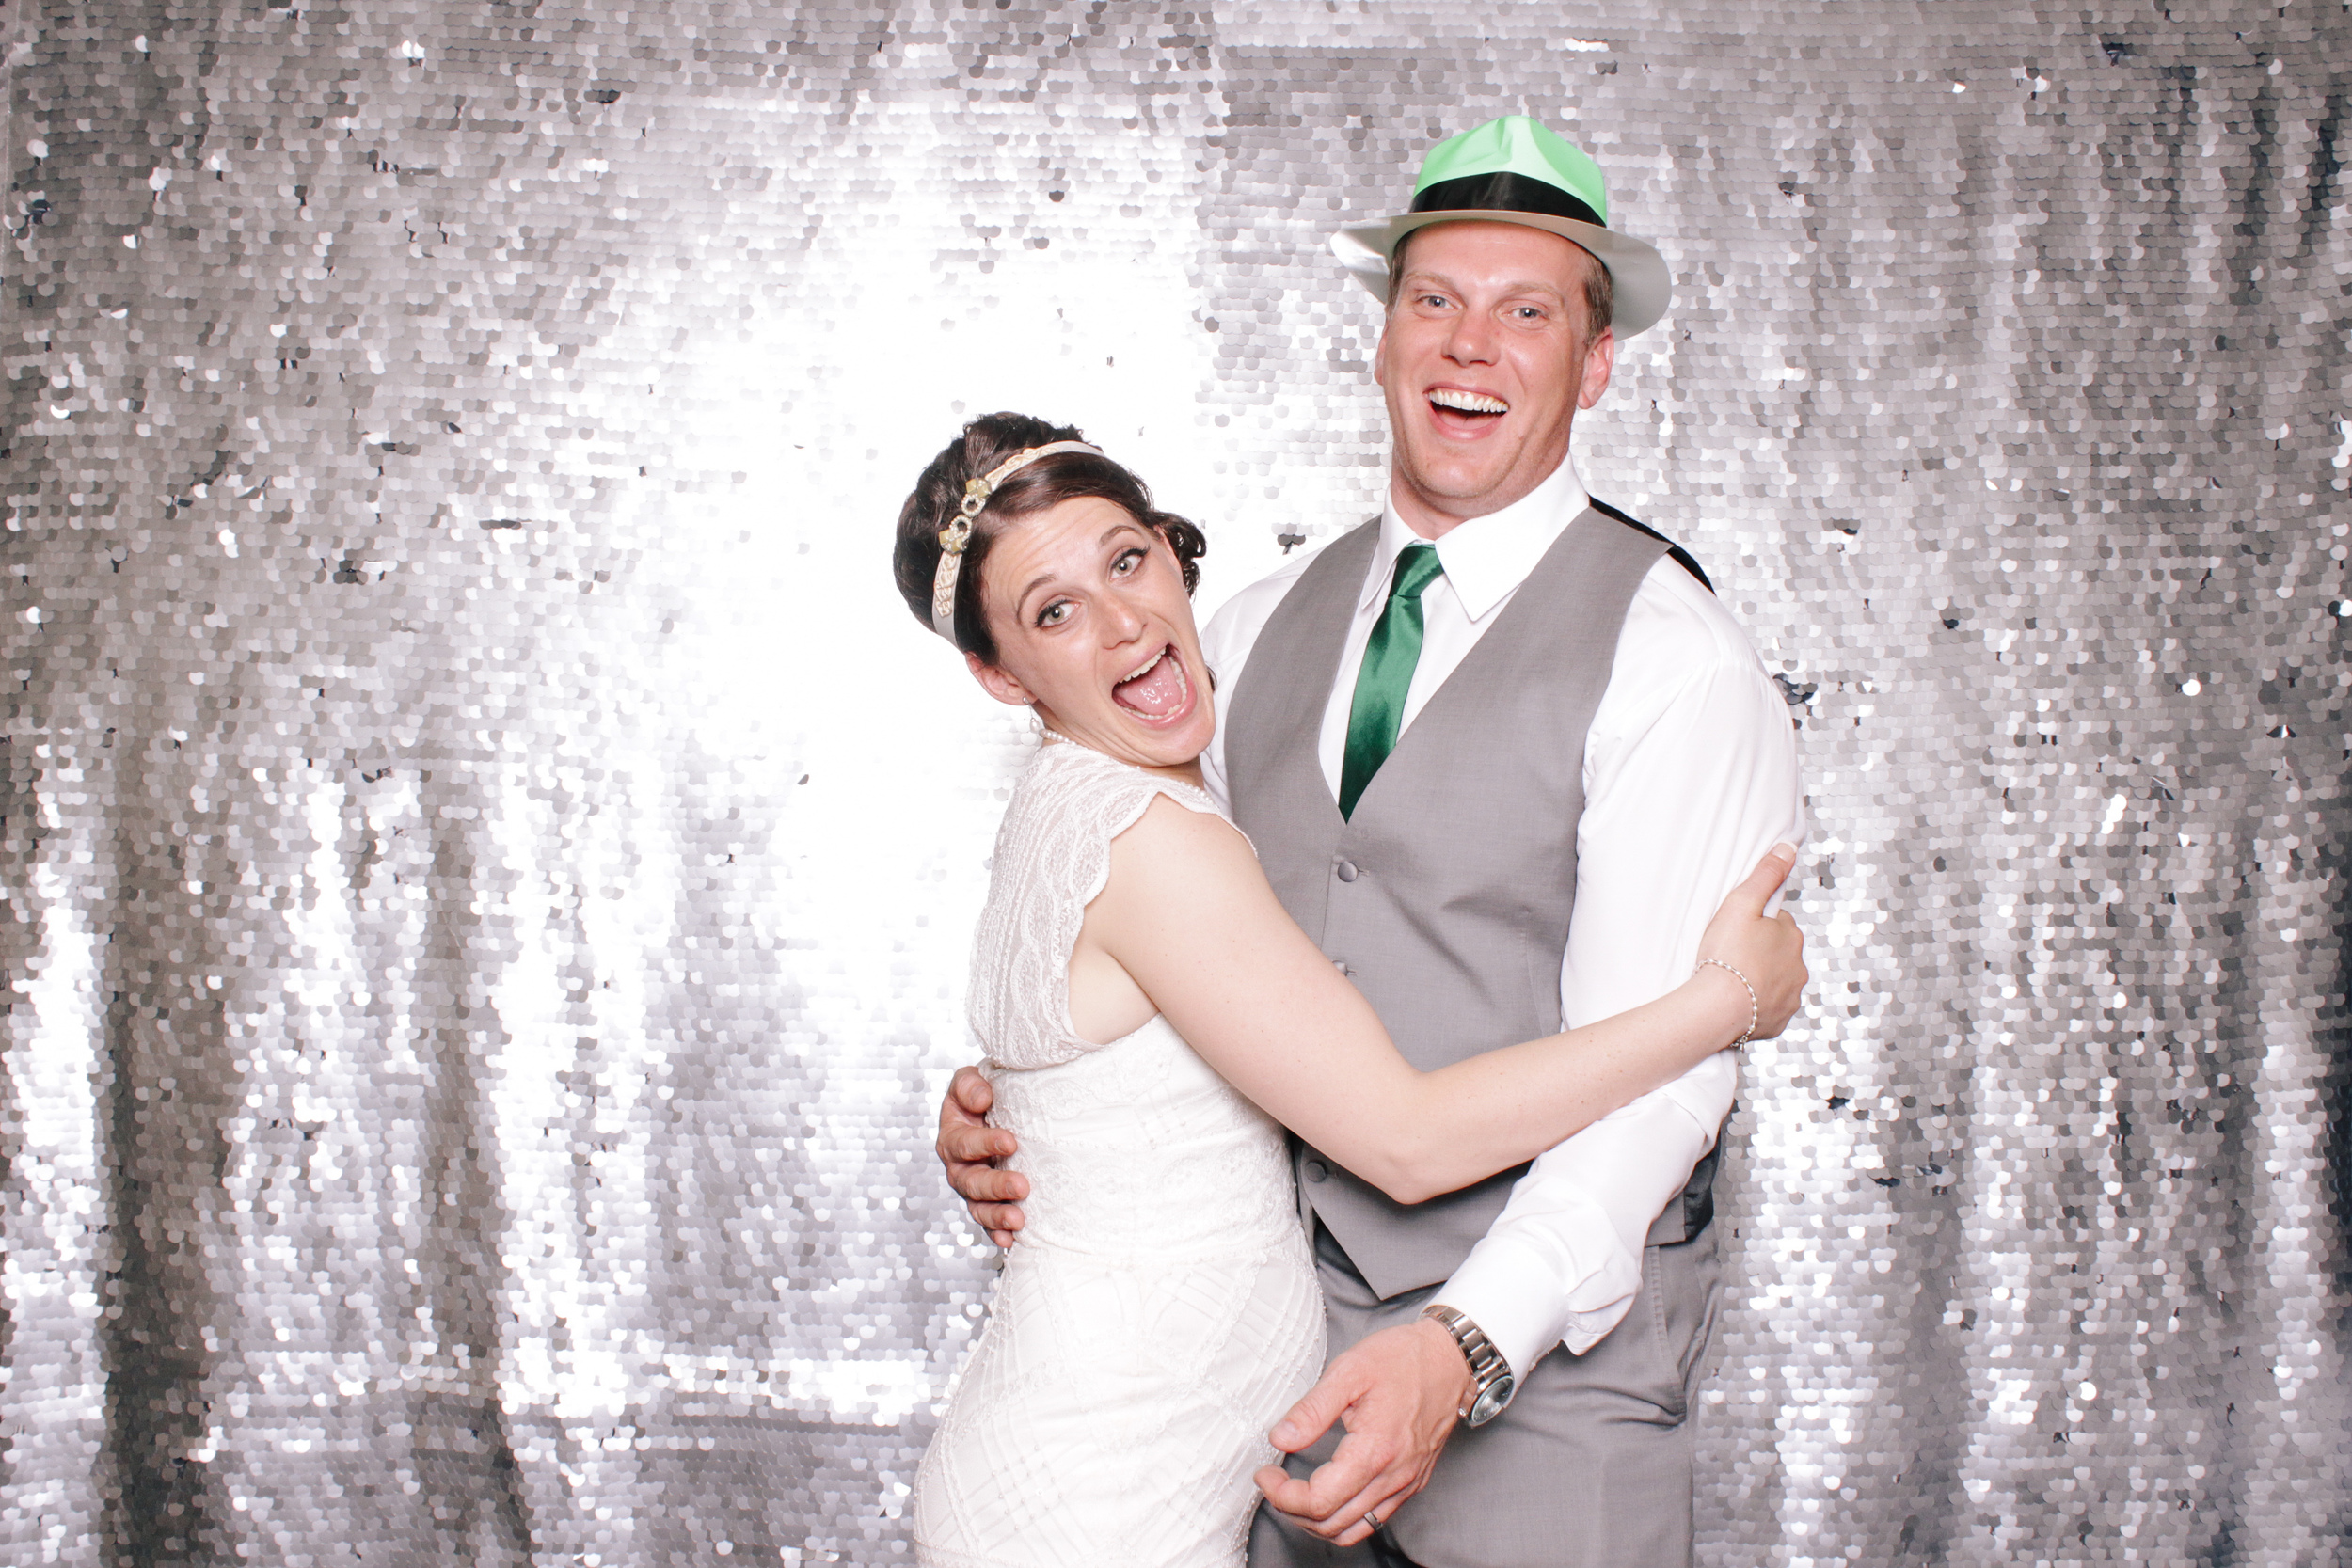 00423-Too Much Awesomeness Photo Booth -20150509.jpg